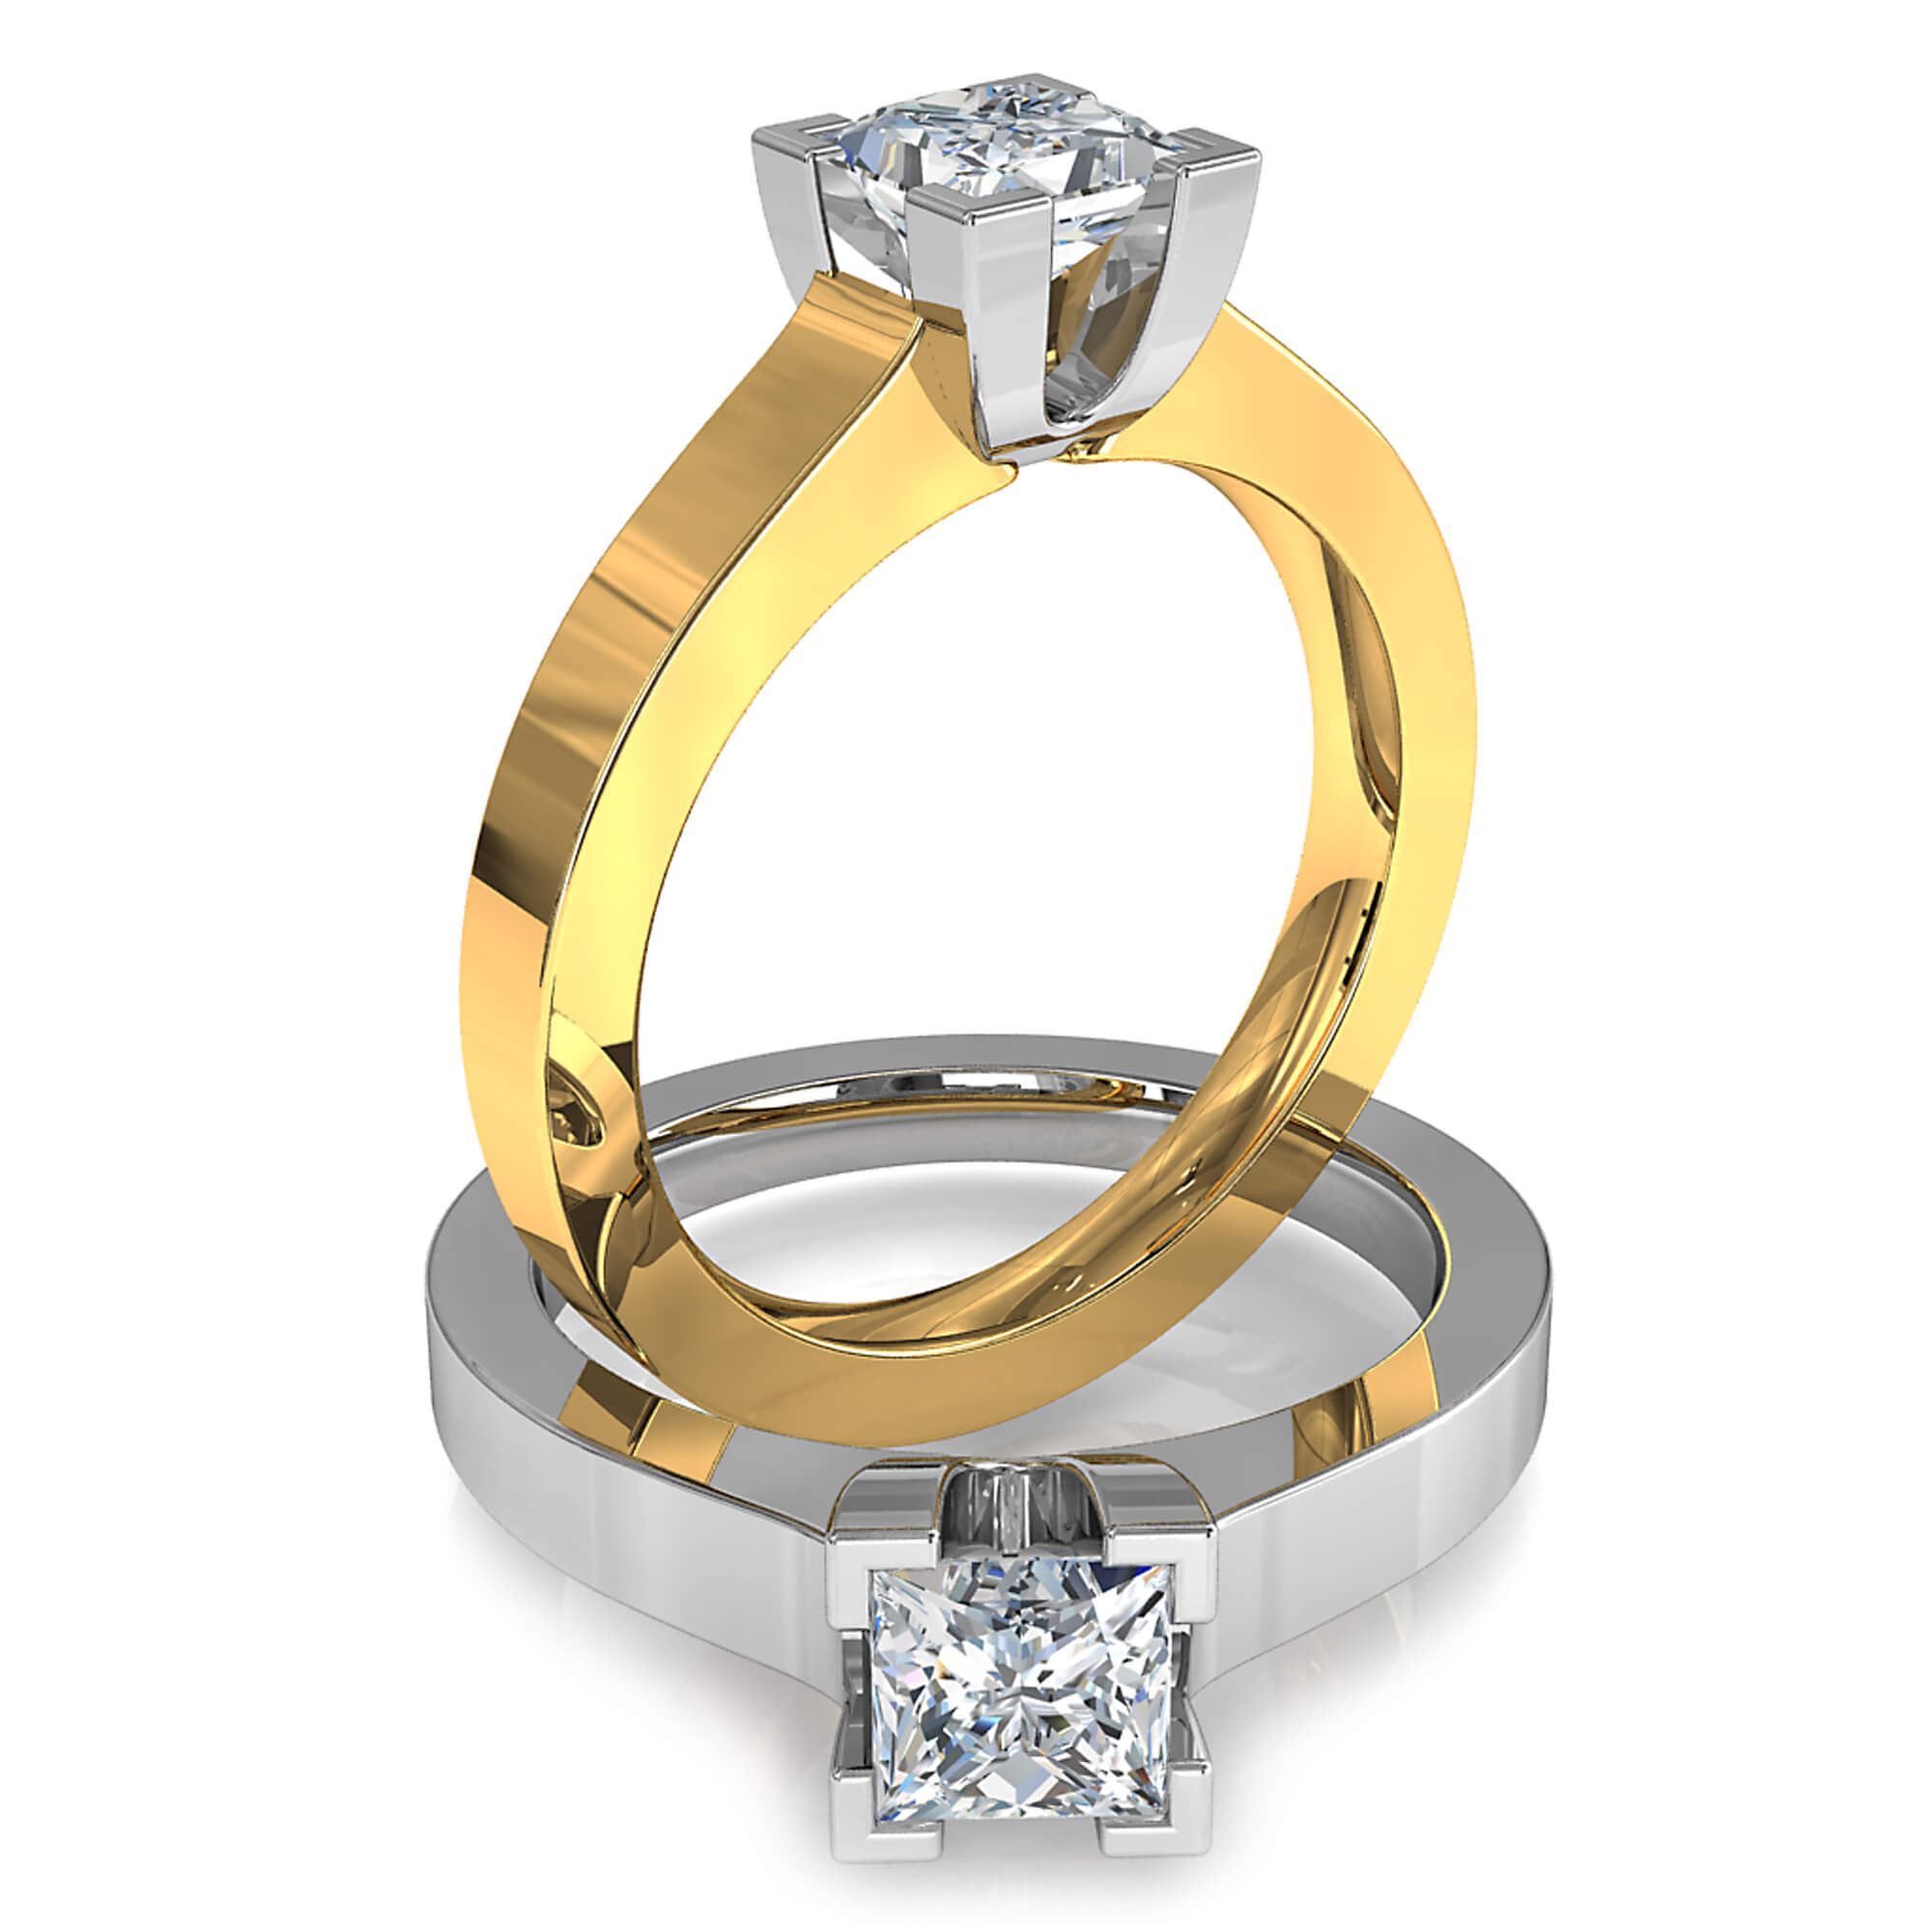 Princess Cut Solitaire Diamond Engagement Ring, 4 Corner Claws on a Thick Flat Band.